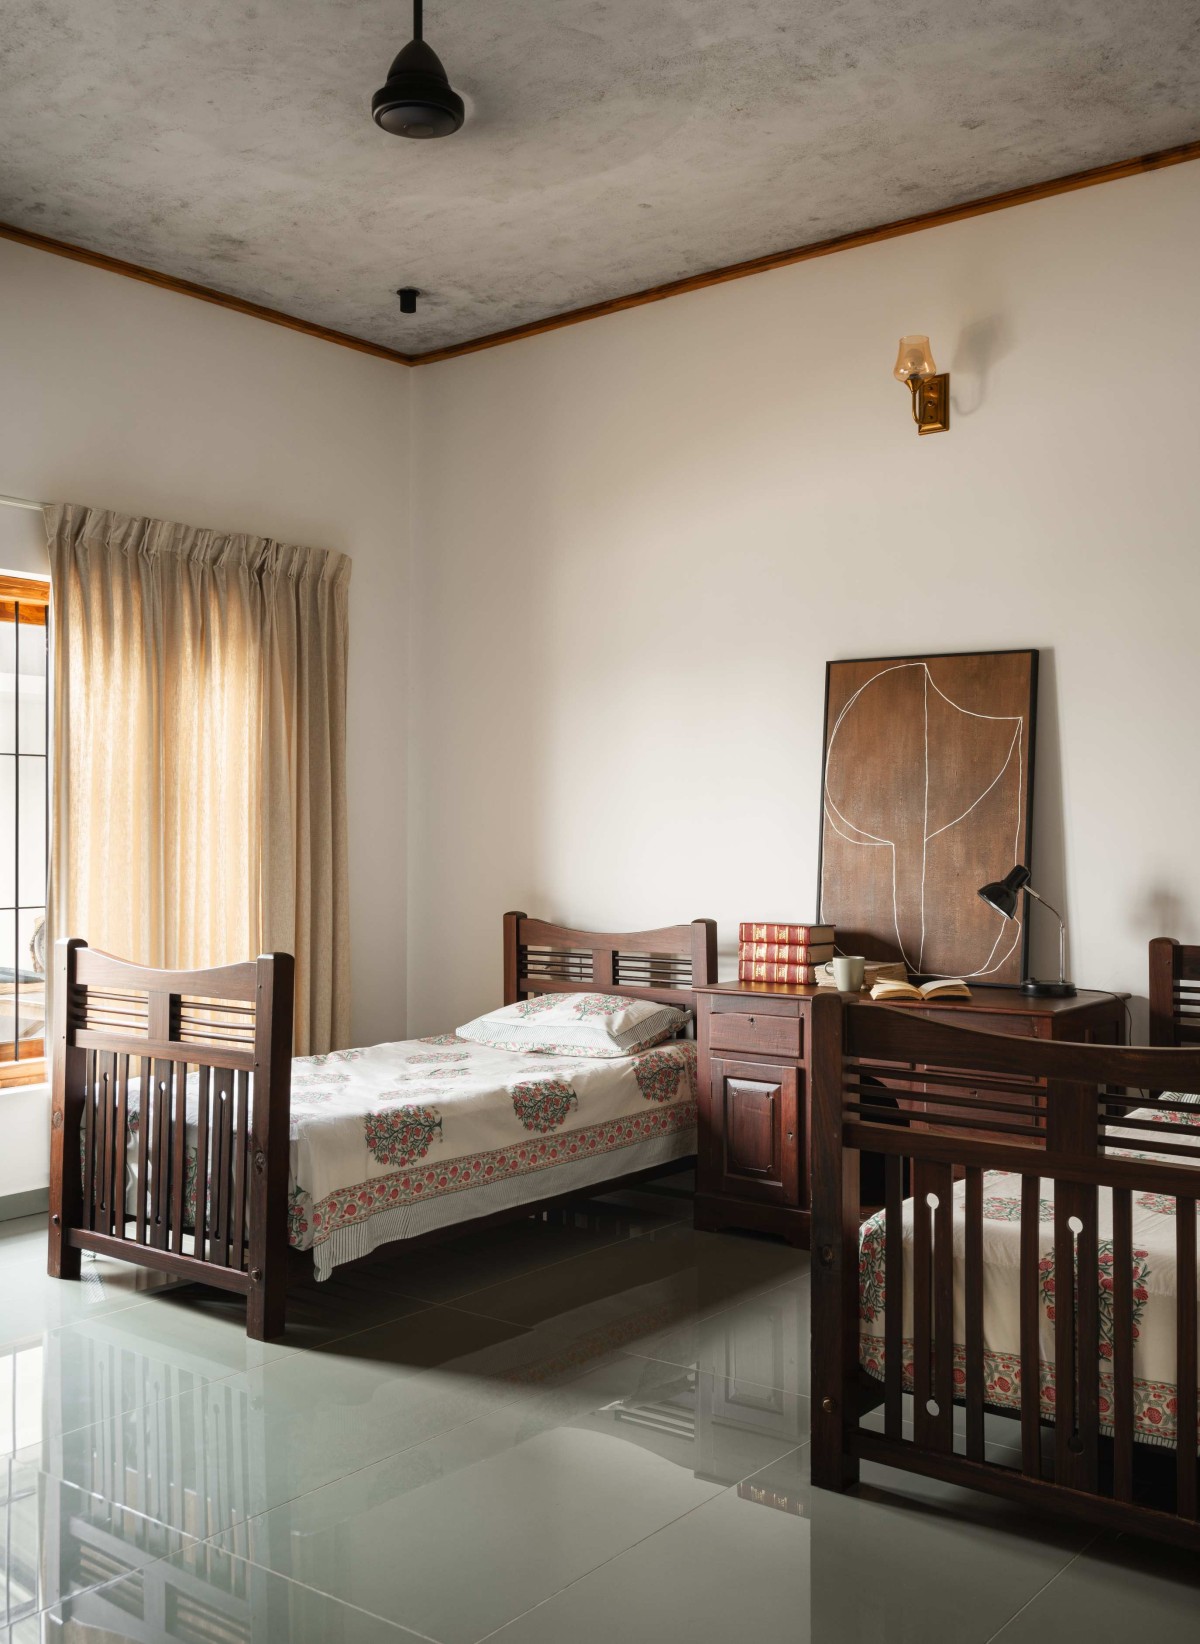 Bedroom 3 of Zikr by Barefoot Architects